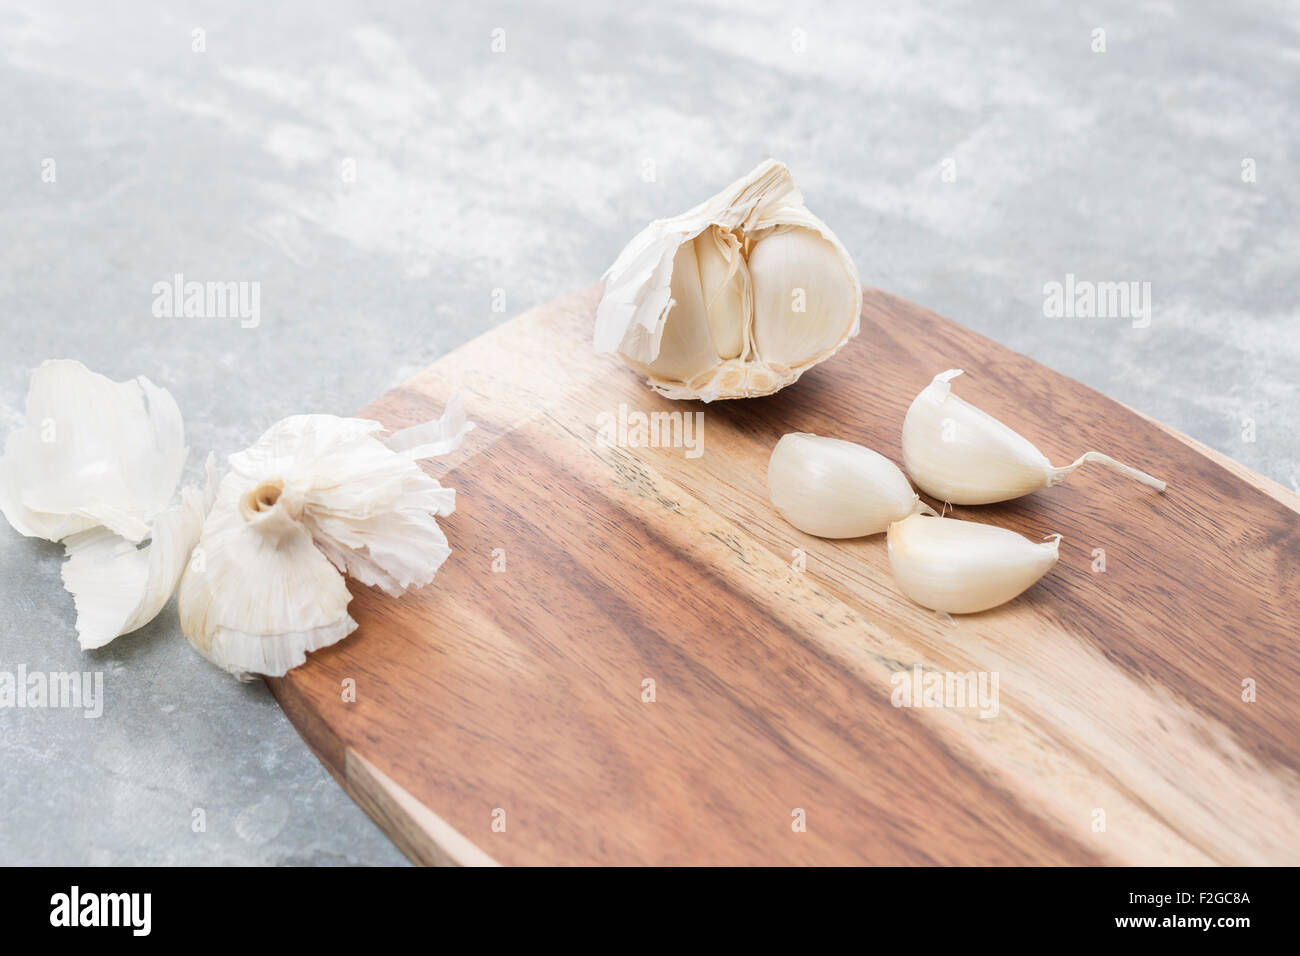 Garlic bulb and single cloves on a wooden board Stock Photo